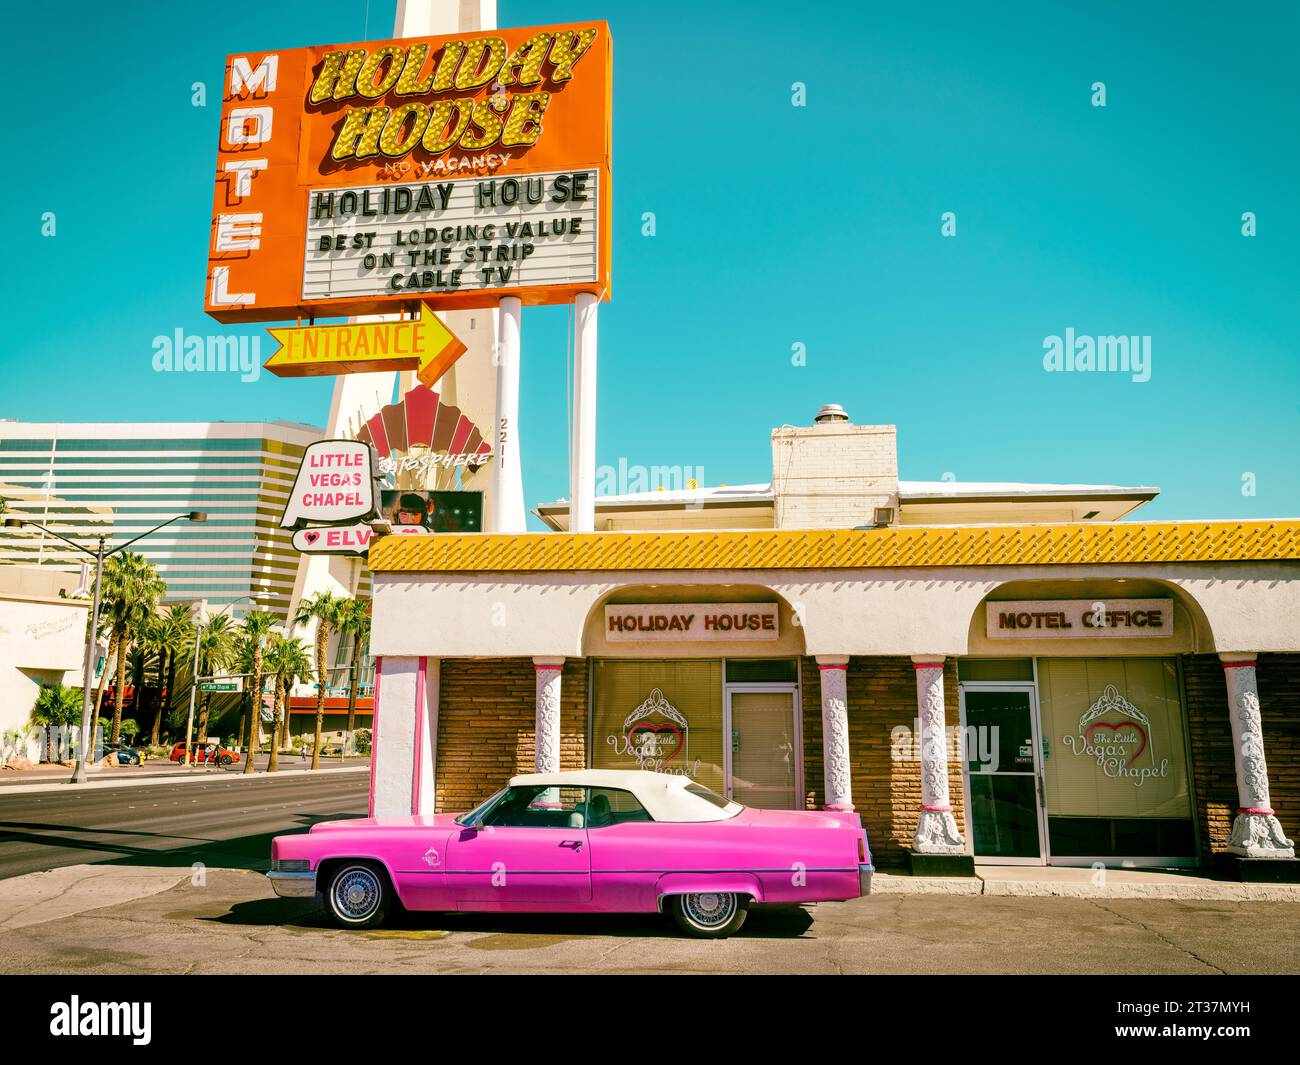 Holiday House Motel  with Wedding Chappel included  Famous Las Vegas Strip and Boulevard Las Vegas,Nevada,Clark County USA Stock Photo